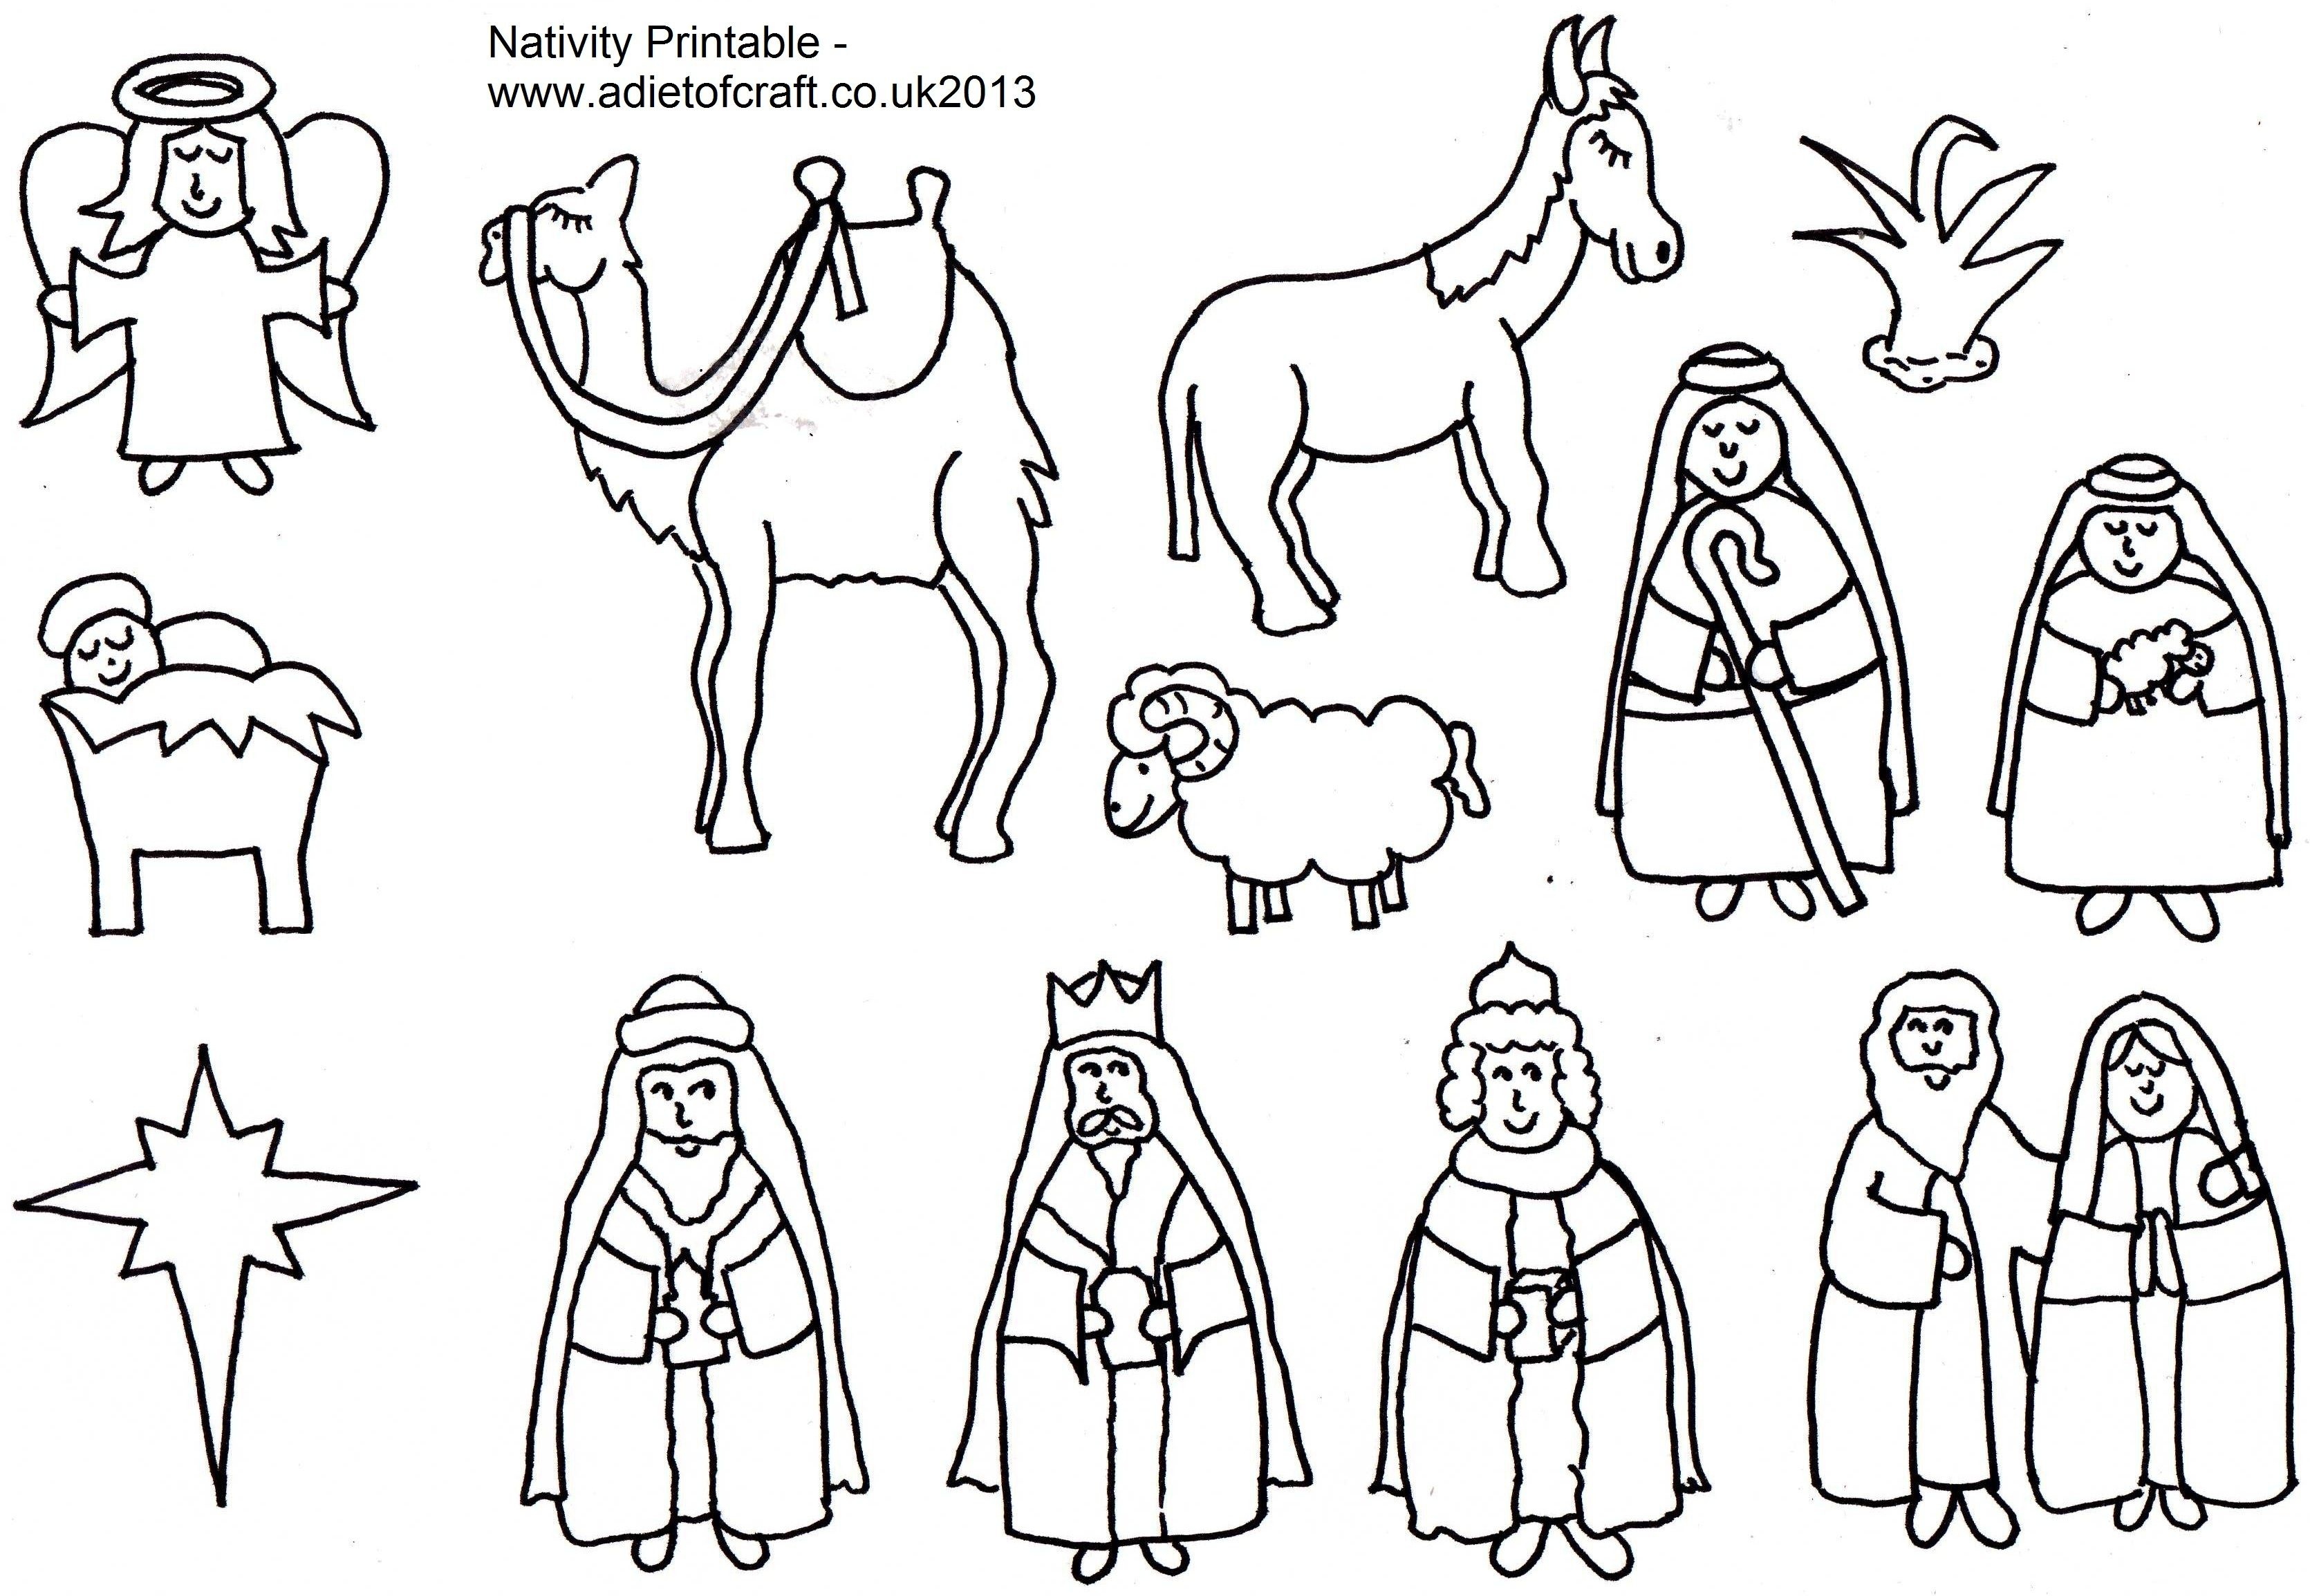 Adult Coloring Pages Of The Nativity Free In Nativity Coloring Pages - Free Printable Pictures Of Nativity Scenes